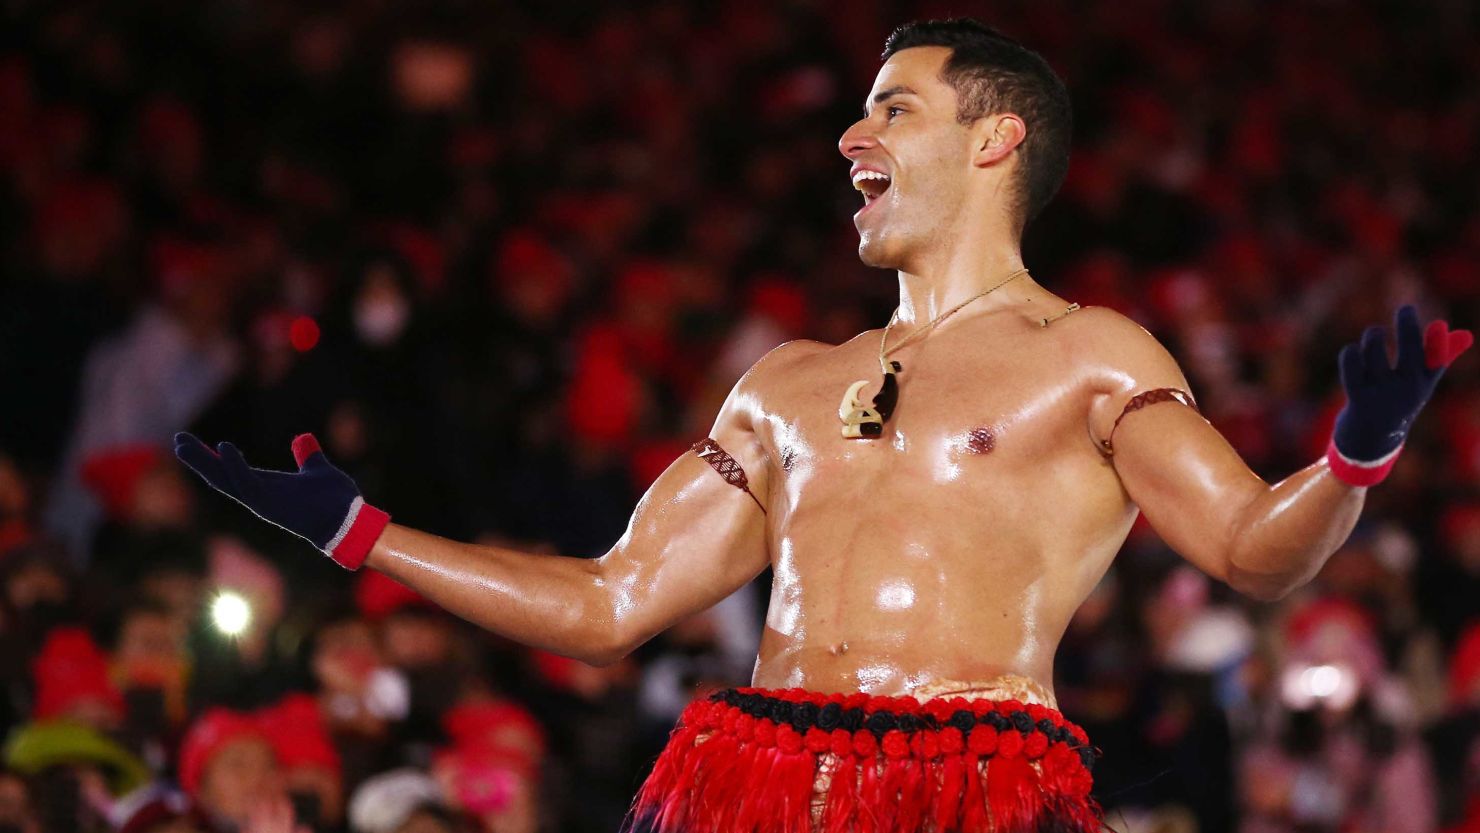 Pita Taufatofua on stage during the closing ceremony of the PyeongChang 2018 Winter Olympics.